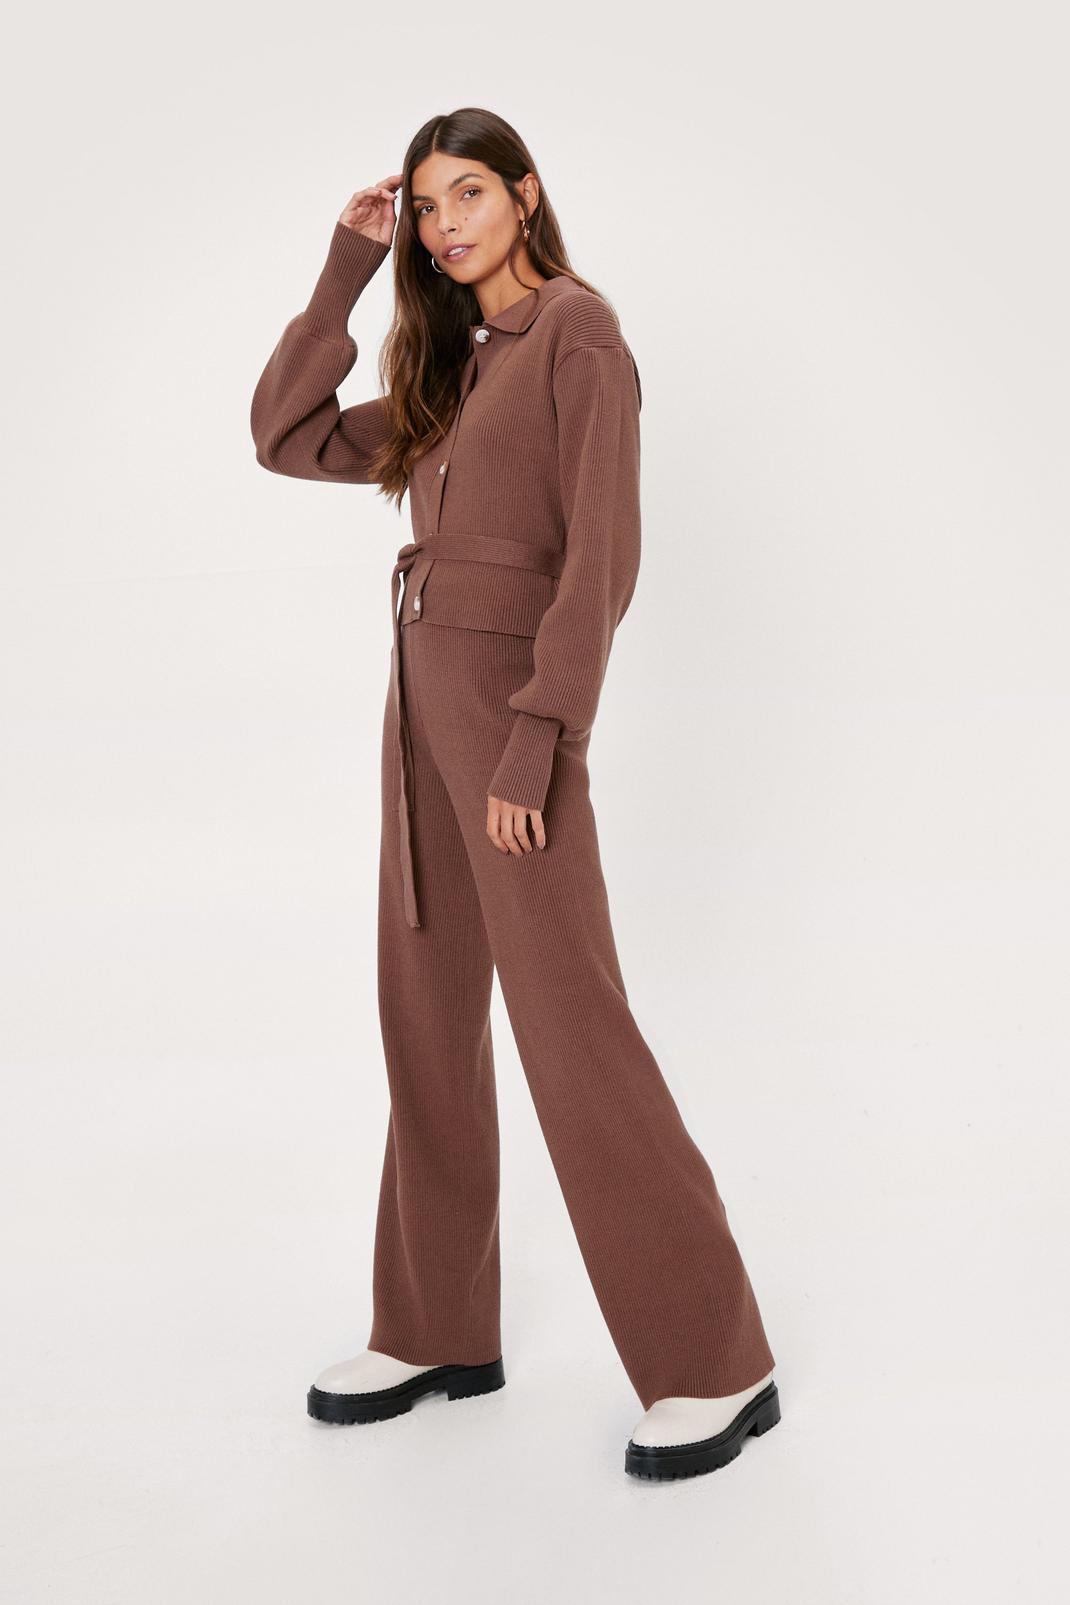 186 Wrap Around Tie Knit Cardigan and Pants Set image number 2